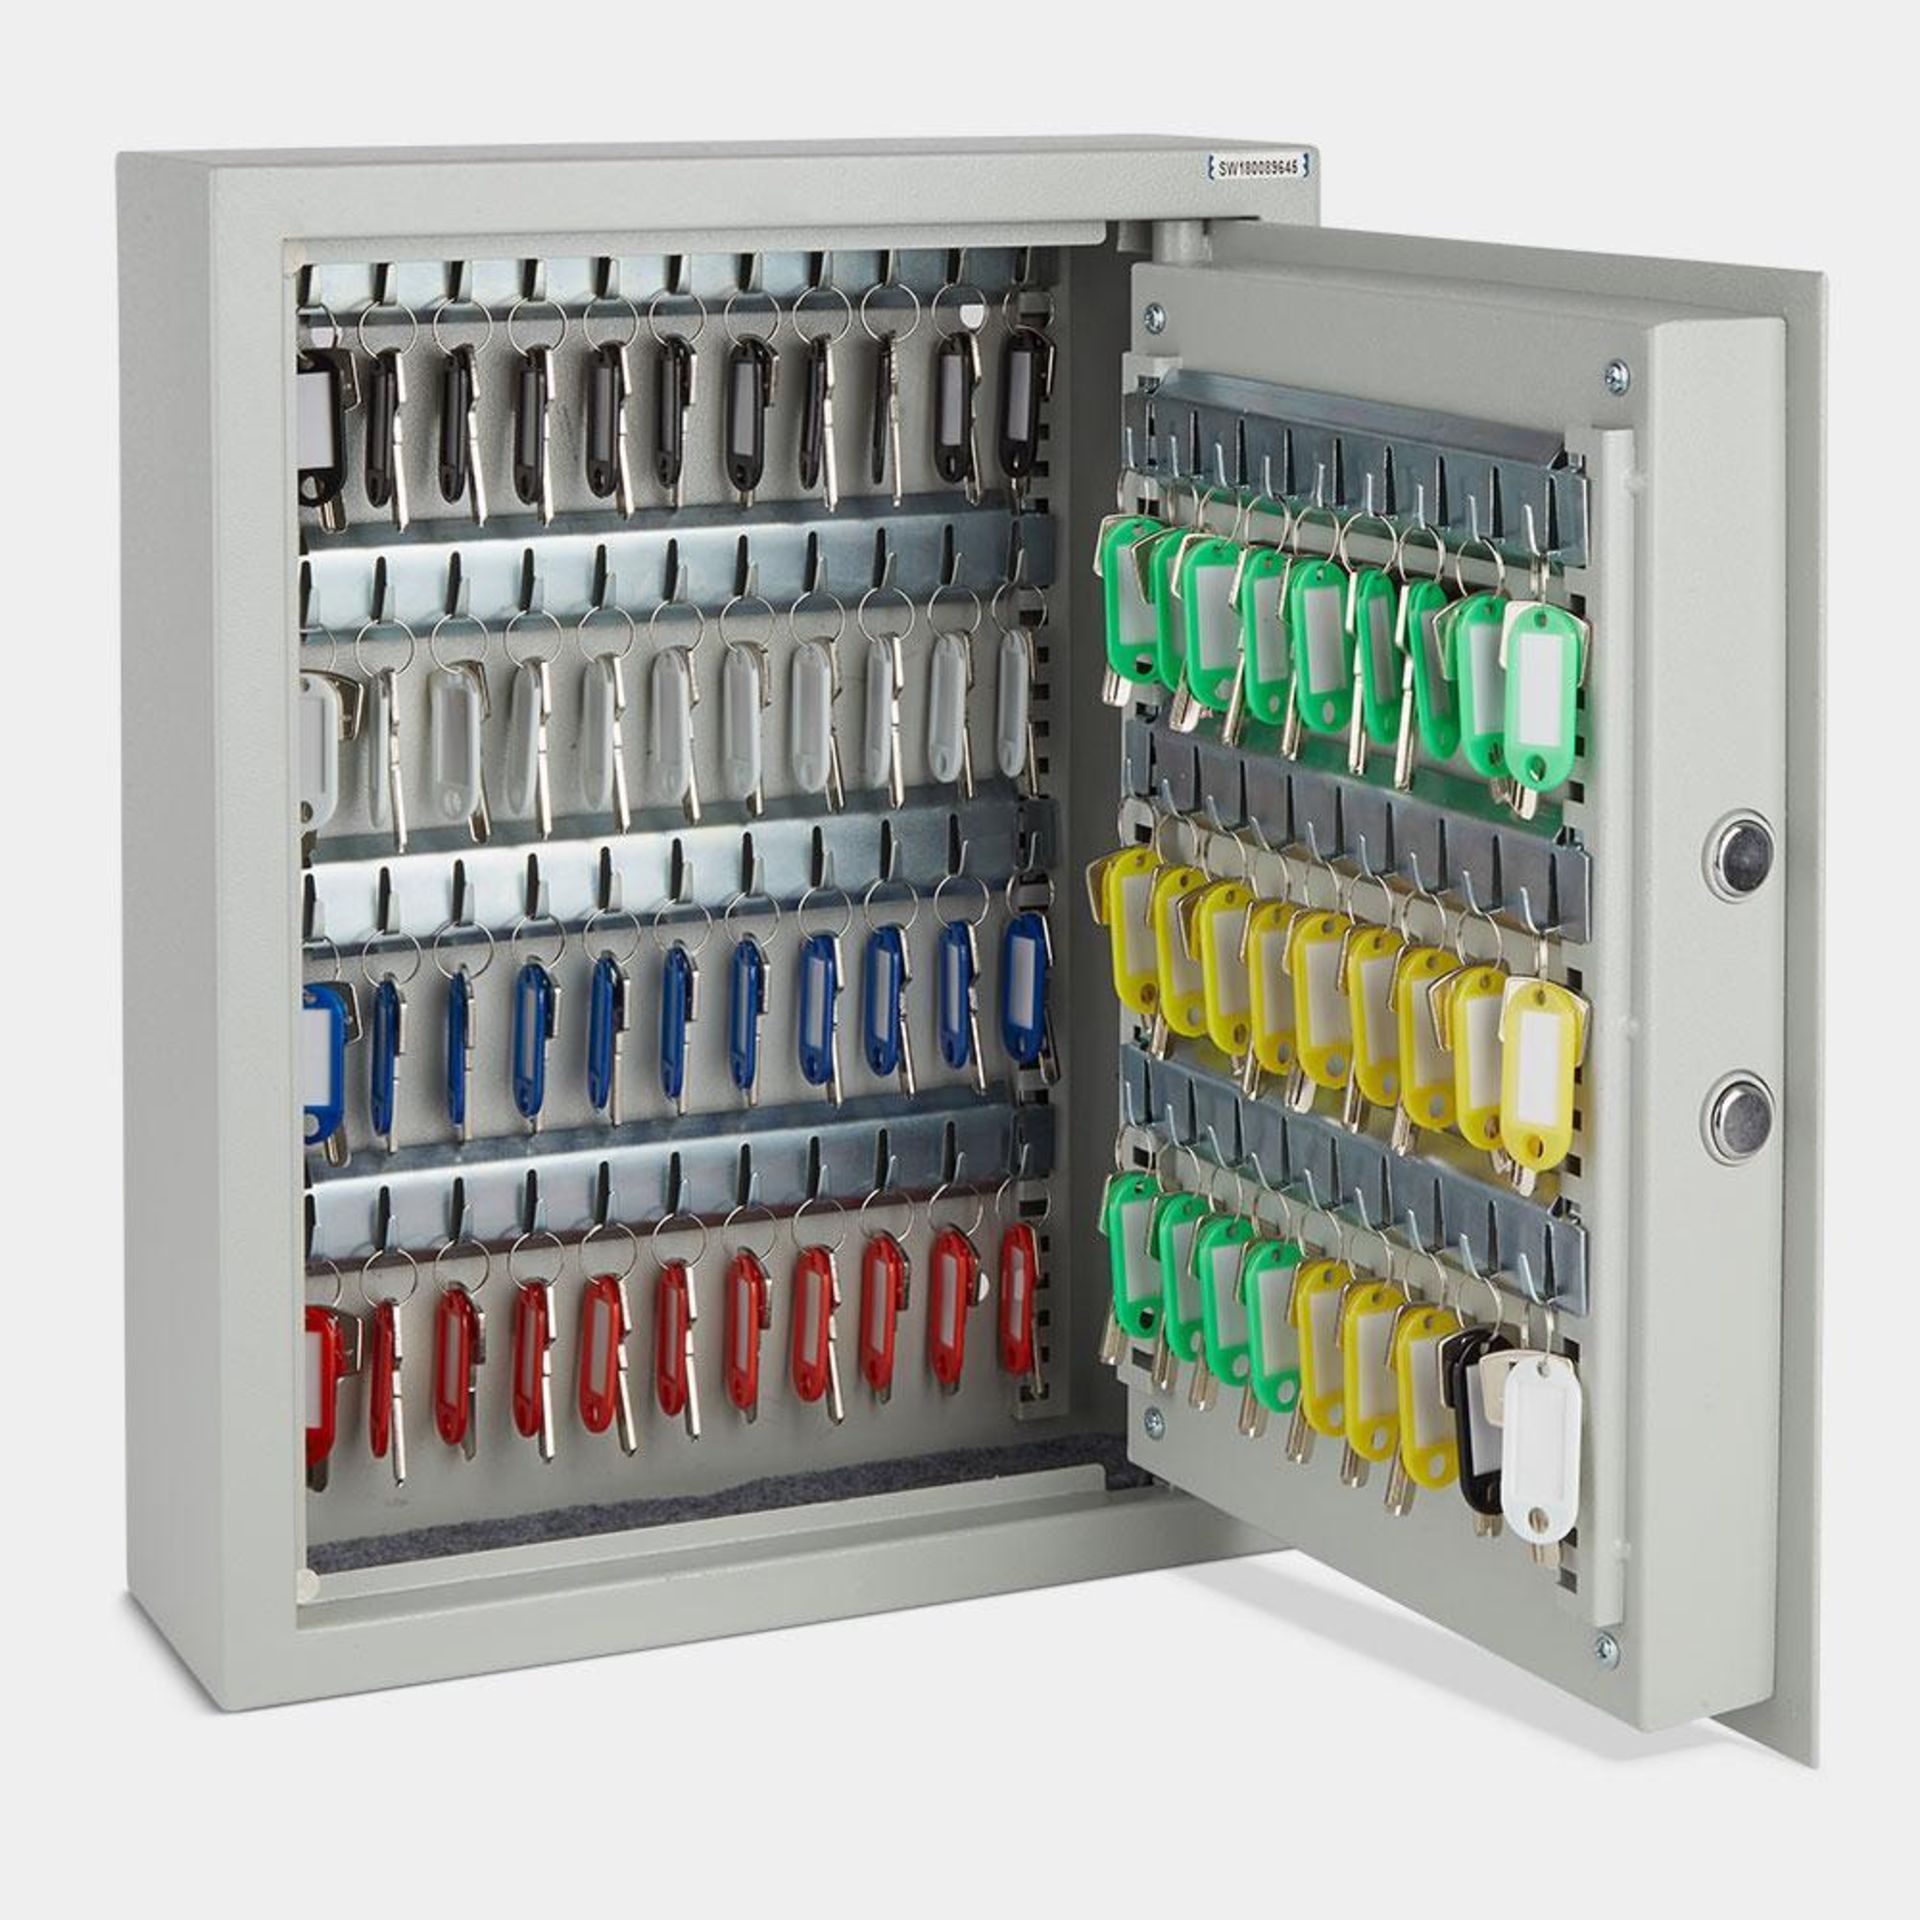 71 Key Digital Cabinet Safe - PW 71 Key Digital Cabinet SafeIf youâ€™re looking for a secure and